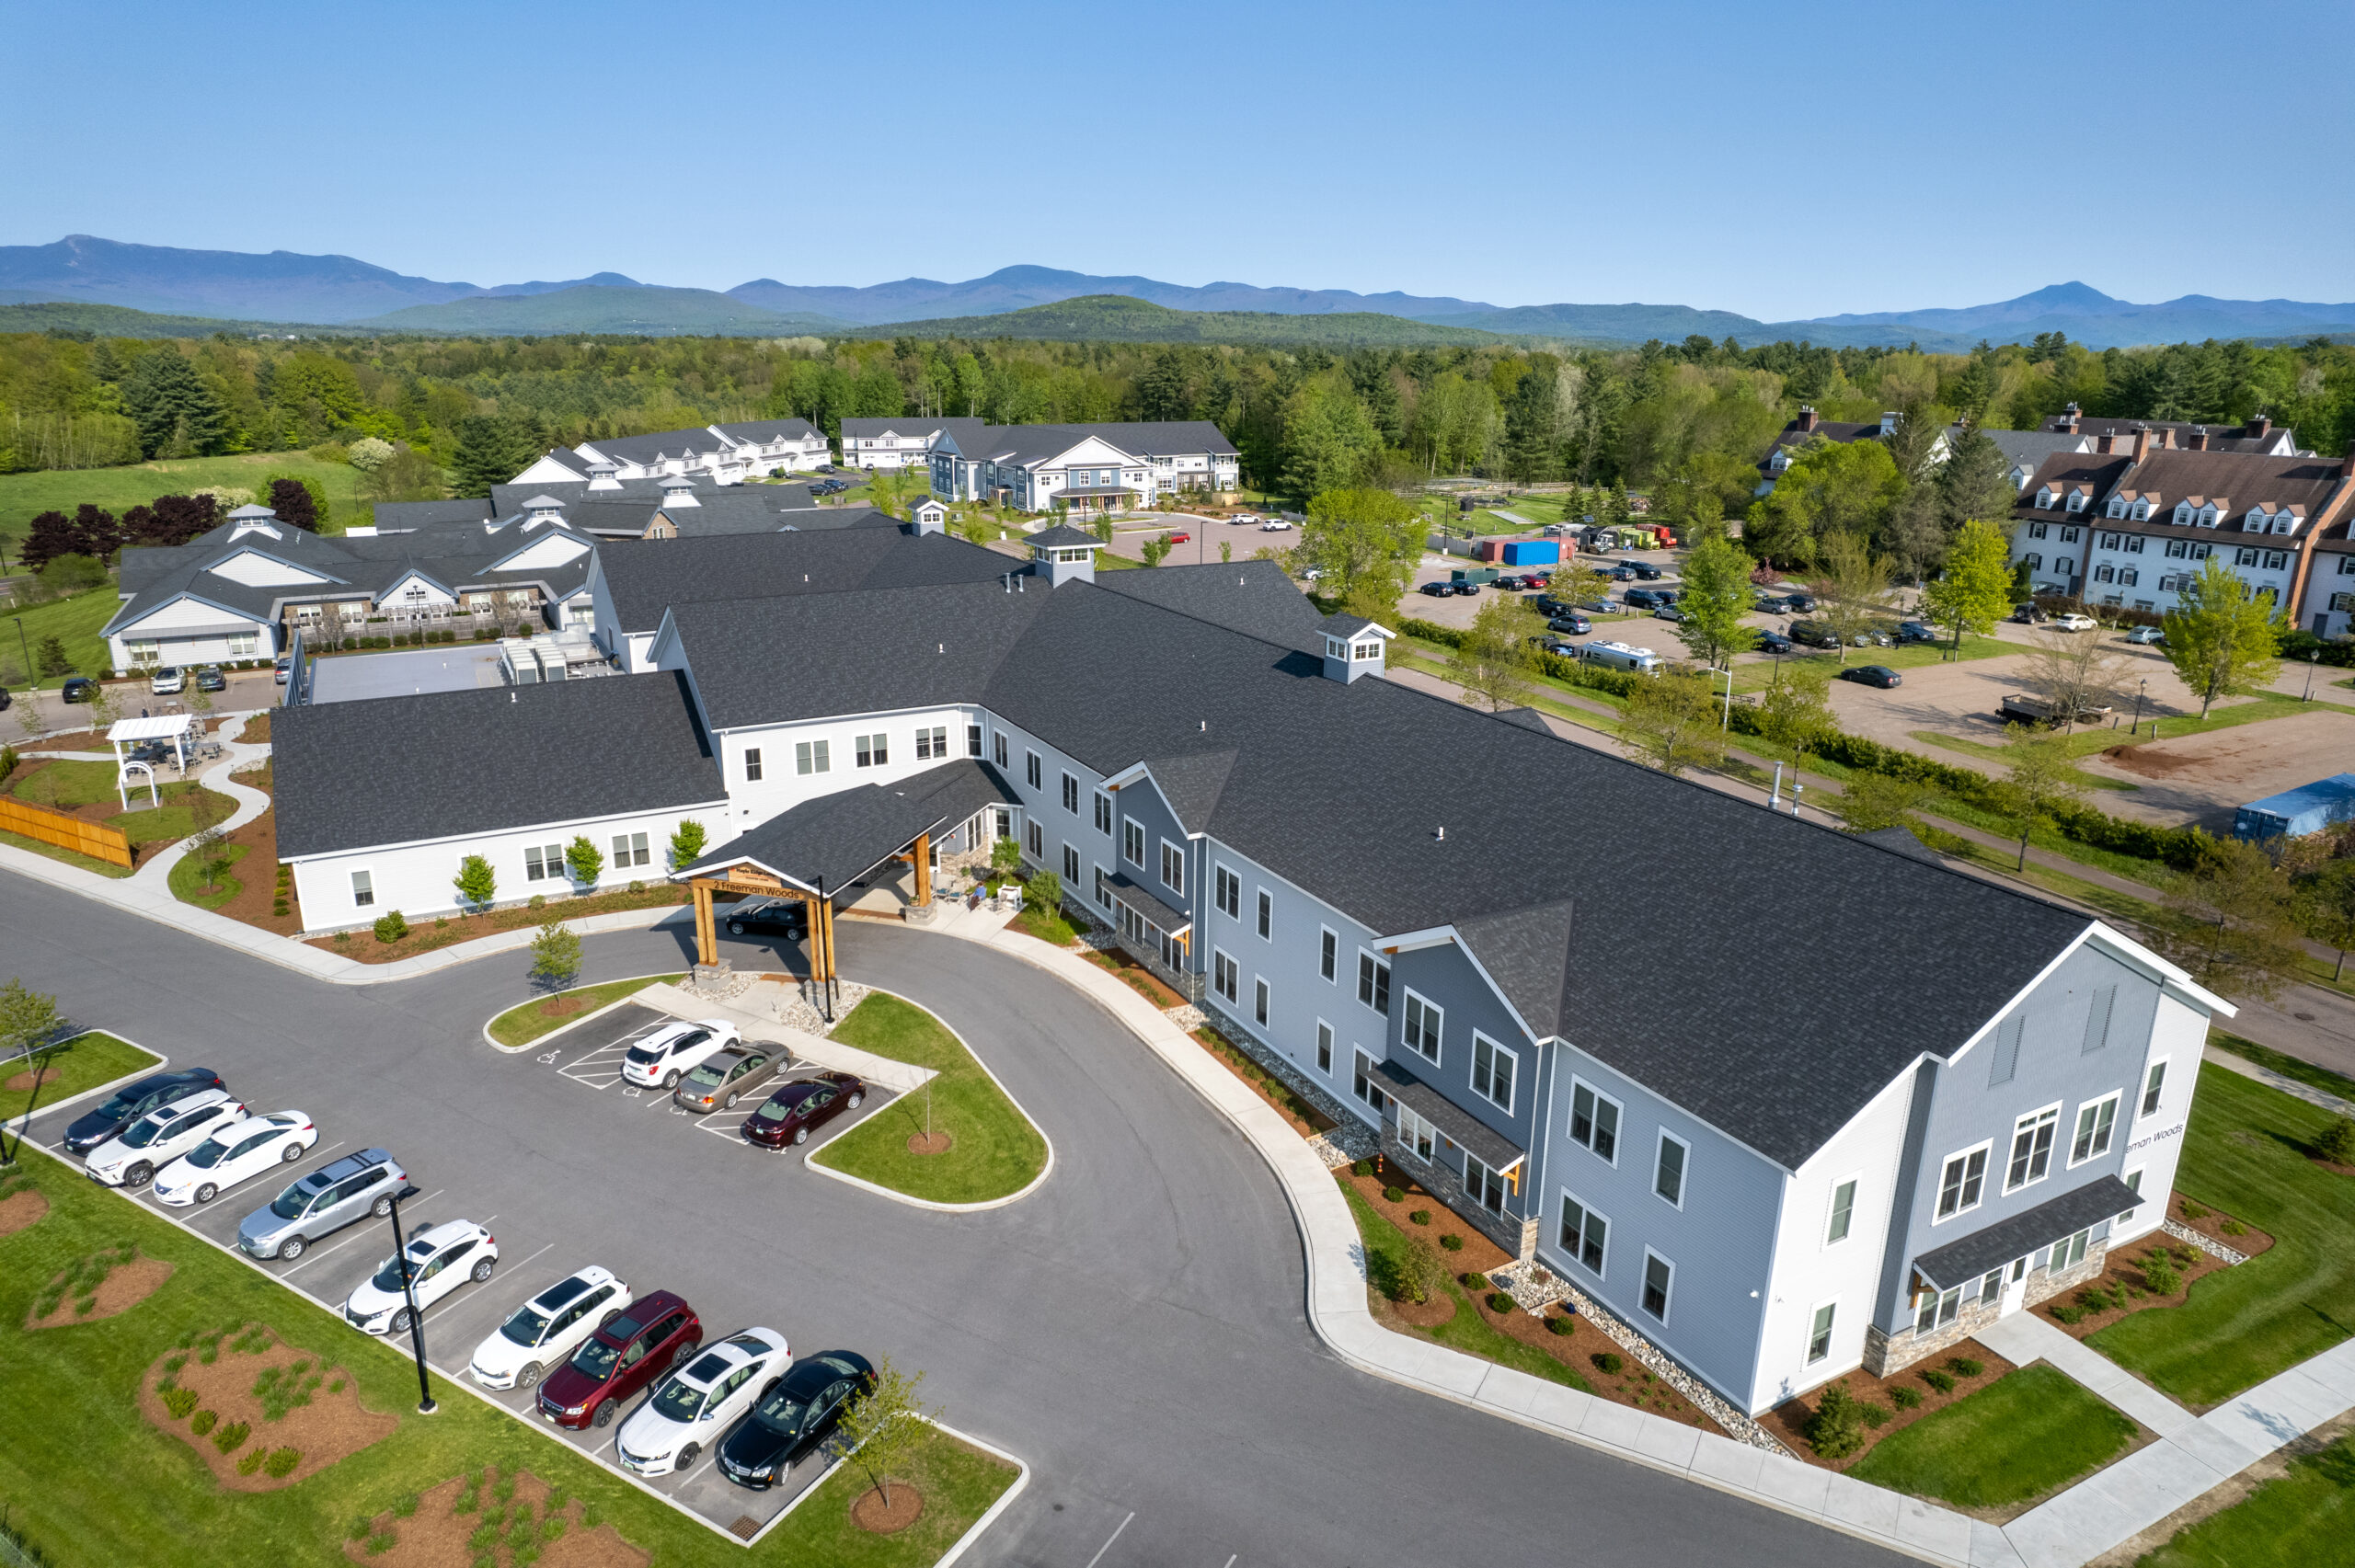 Asphalt Shingle Roof – Assisted Living Facility in Essex, VT